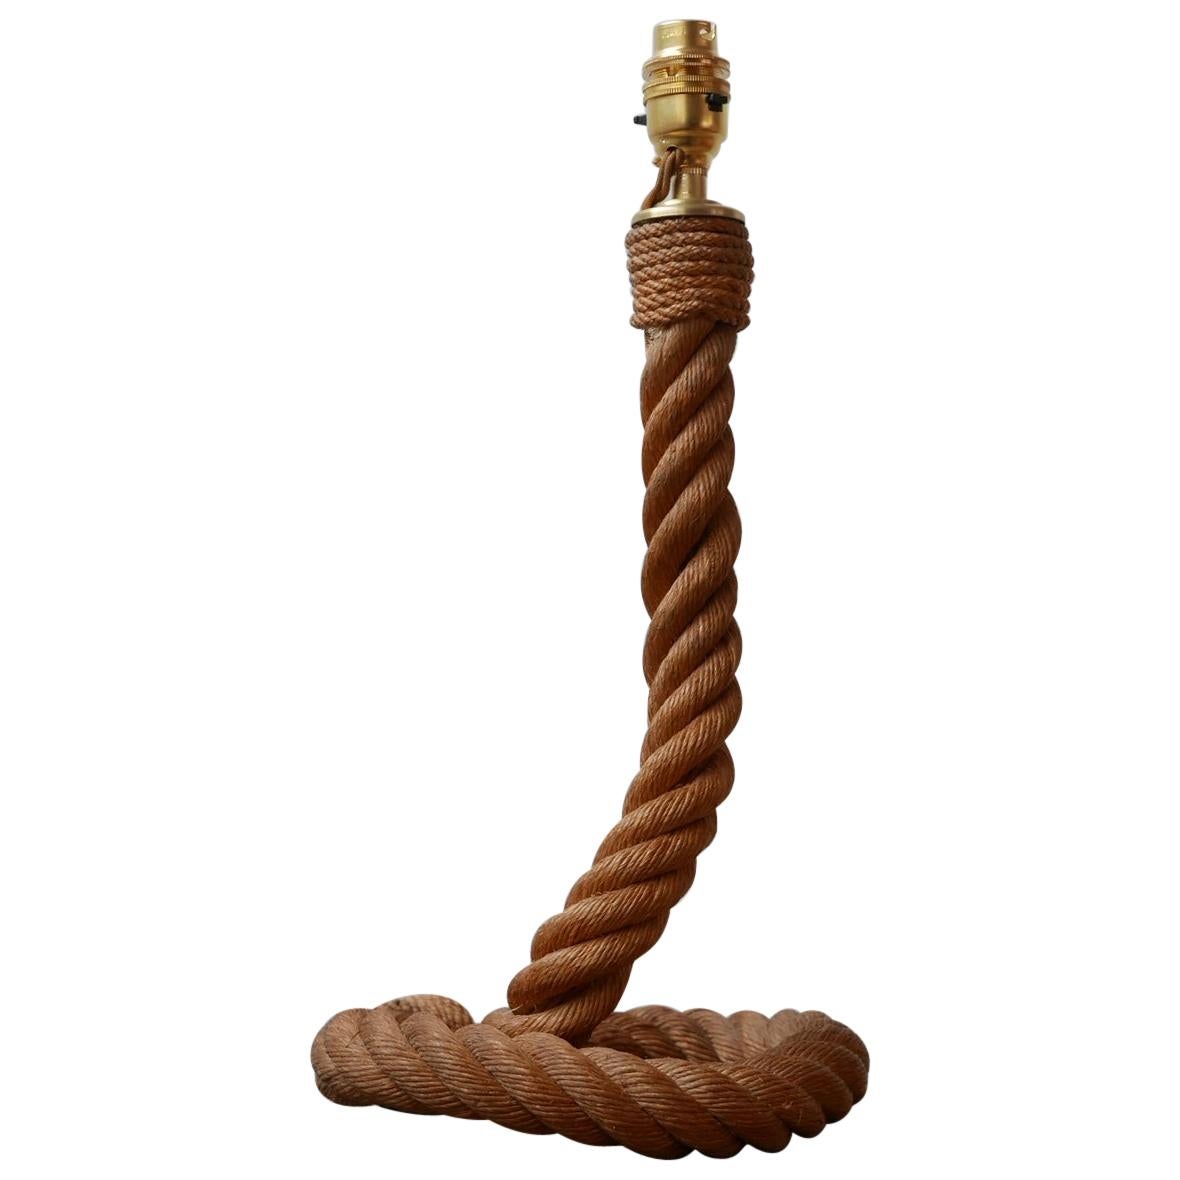 Audoux Minet Midcentury Rope Cord Table Lamp